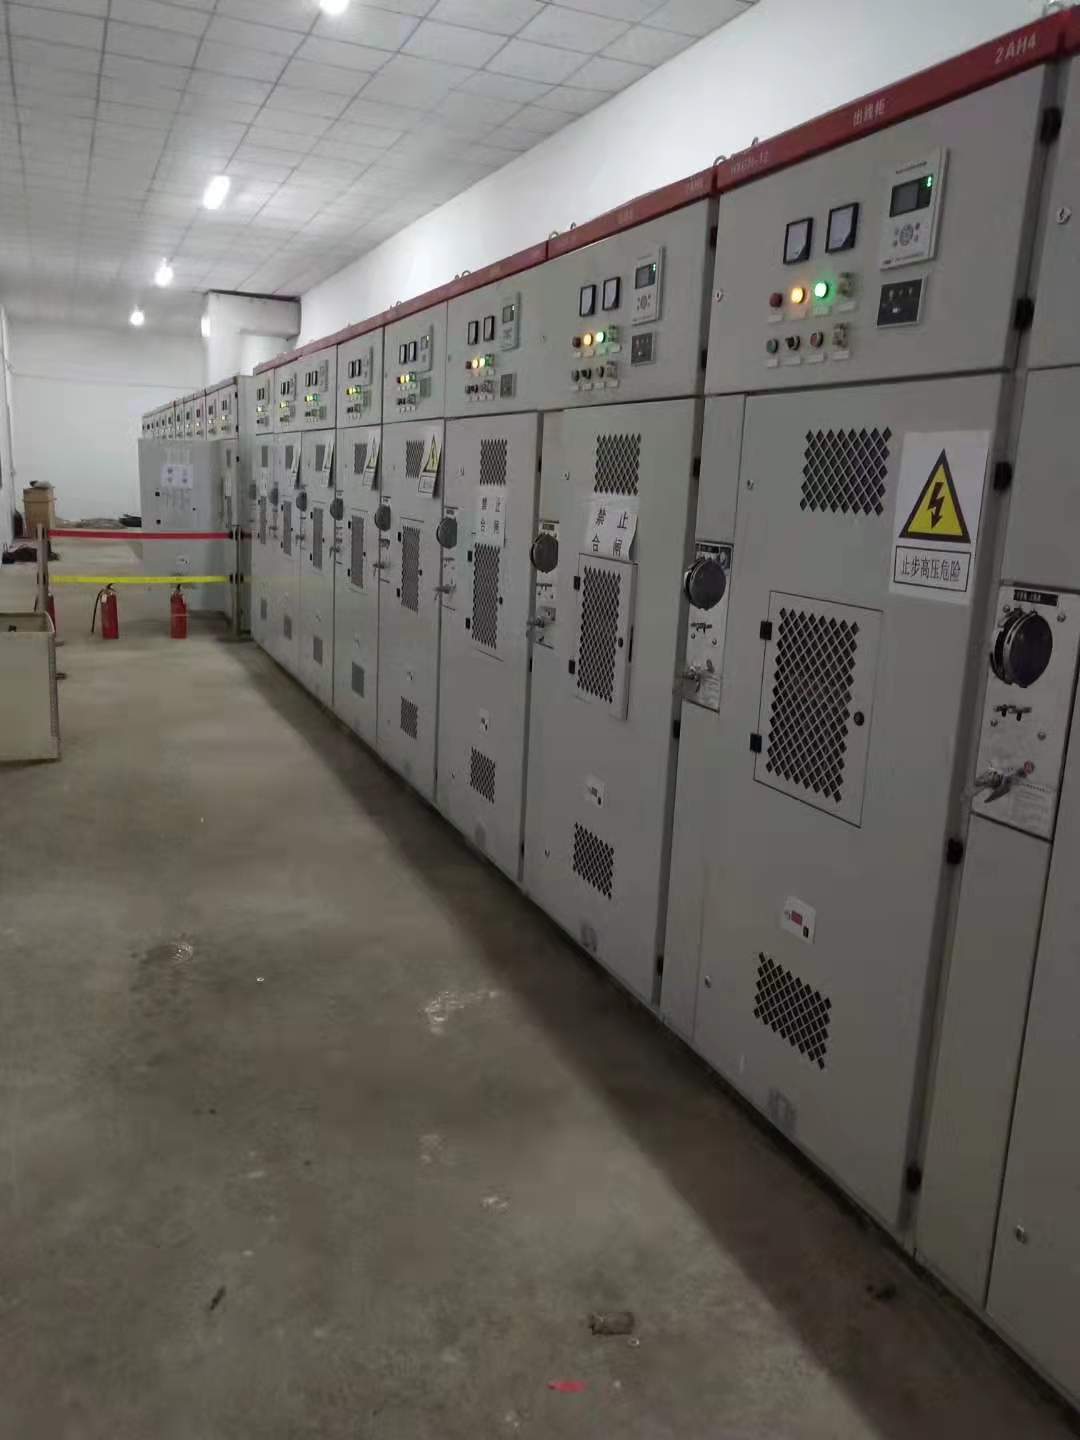 The lowest price switch cabinet wholesaler in China-SPL- power transformer,electrical transformer,Combined compact substation,Metalclad AC Enclosed Switchgear,Low Voltage Switchgear,Indoor AC Metal Clad Intermediate Switchgear,Non-encapsulated Dry-type Power Transformer,Unwrapped coil dry-type transformer,Epoxy resin cast silicon steel sheet dry-type transformer,Epoxy resin cast amorphous alloy dry-type transformer,Amorphous alloy oil-immersed power transformer,Silicon steel sheet oil-immersed power,electric transformer,Distribution Transformer,voltage transformer,step-down transformer,reducing transformer,low-loss power transformer,loss power transformer,Oil-type Transformer,Oil Distribution Transformer,Transformer-Oil-lmmersed,Oil Transformer,Oil Immersed Transformer,three phase oil immersed power transformer,oil filled electrical transformer,Sealed amorphous alloy power transformer,Dry Type Transformer,dry Transformer,Cast Resin Dry Type Transformer,dry-type transformer,resin-casting type transformer,resinated dry type transformer,CRDT,Unwrapped coil power transformer,three phase dry Transformer,articulated unit substation,AS,Modular substation,transformer substation,electric substation,Power Sub-station,Preinstalled substation,YBM,prefabricated substation,Distribution Substation,compact substation,MV power stations,LV power stations,HV power stations,Switchgear Cabinet,MV Switchgear Cabinet,LV Switchgear Cabinet,HV Switchgear Cabinet,pull-out switch cabinet,Ac metal closed ring network switchgear,Indoor metal armored central switchgear,Box-type substation,custom transformers,customized transformers,Metal enclosed electrical switchgear,LV Switchgear Cabinet,